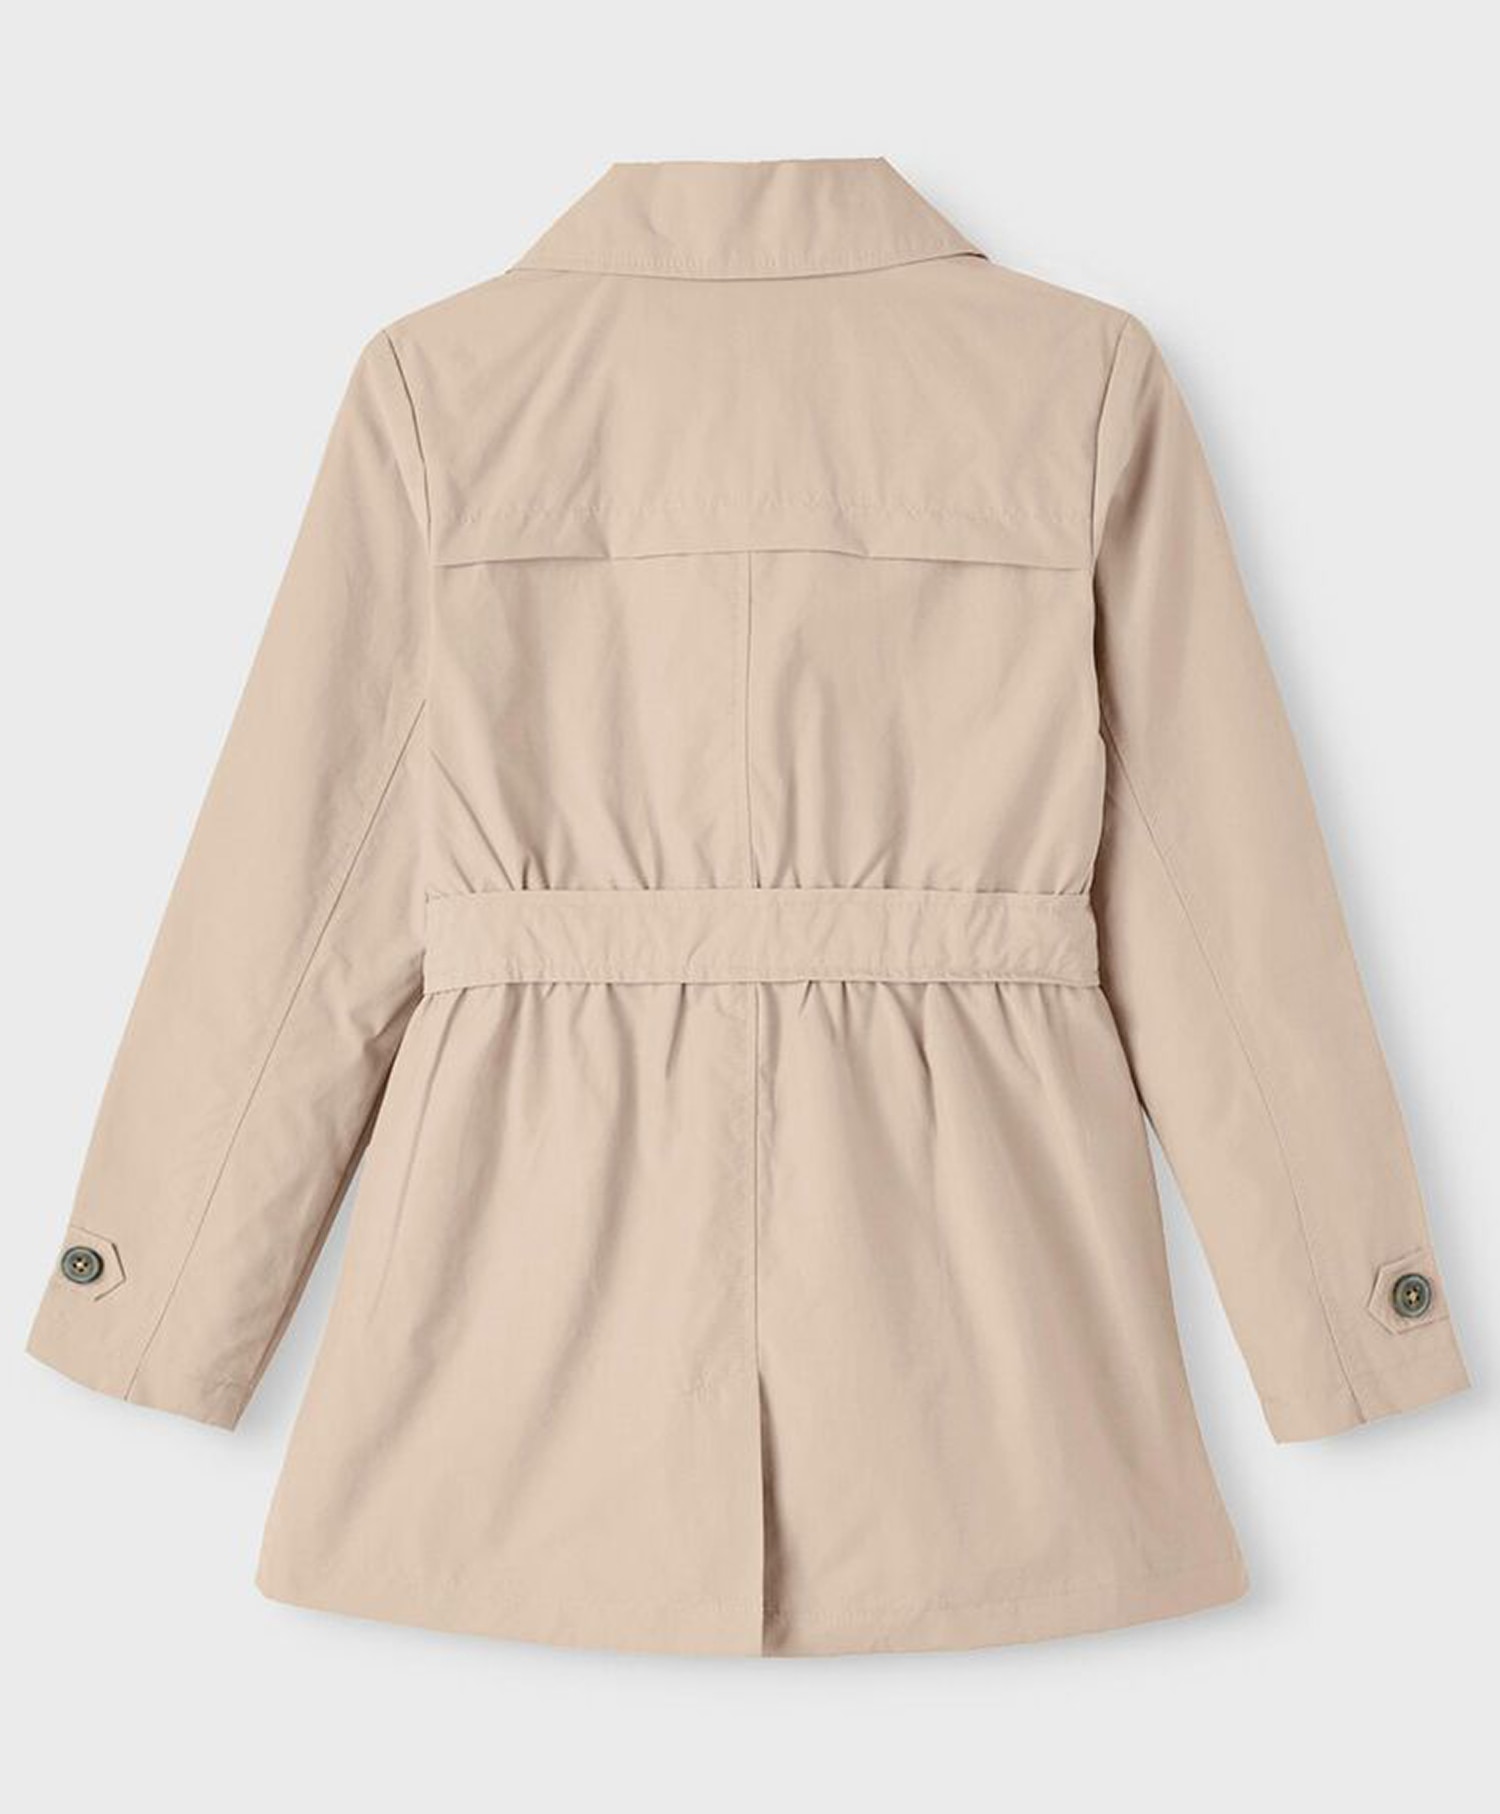 Name it - MADELINE Trench coat